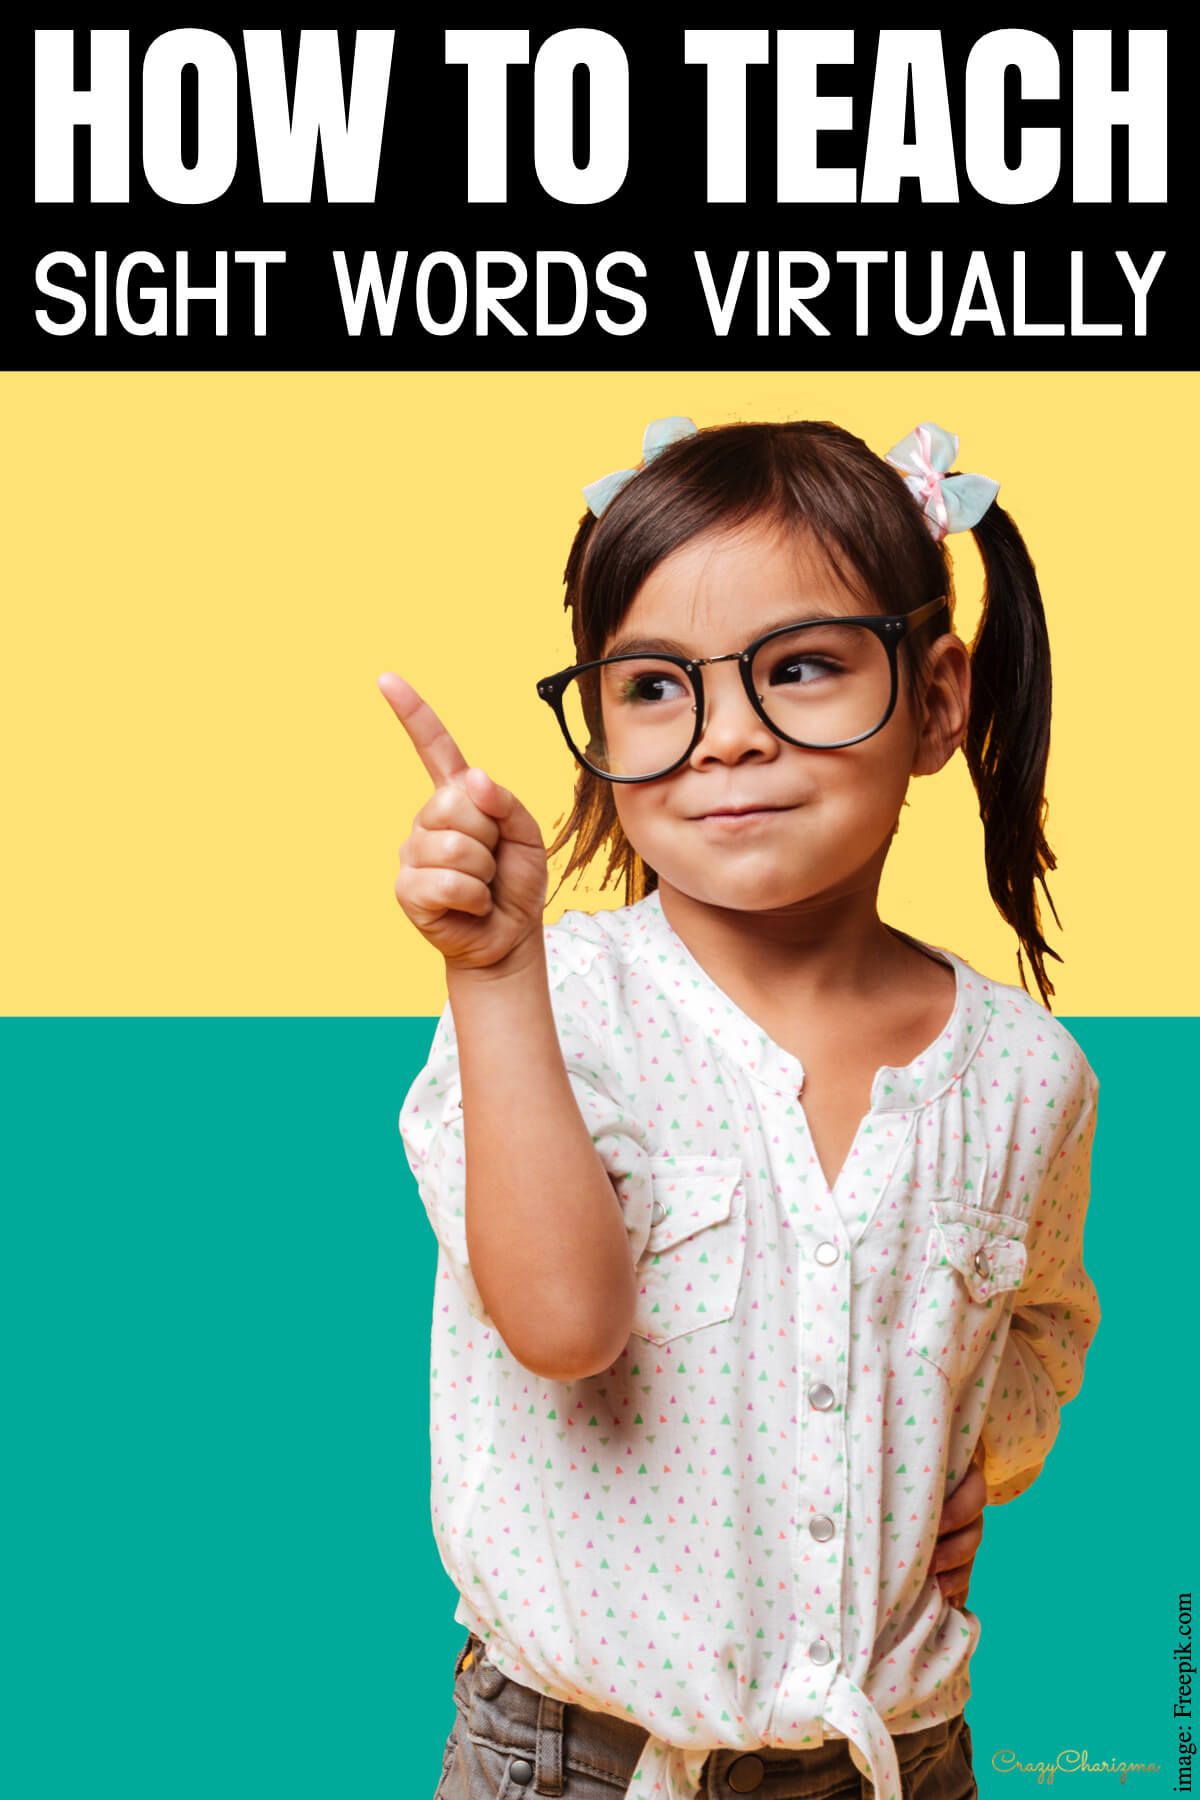 Sight words is my favorite topic to teach. They are the basics of reading. Kids spot them, find them, read them, and this way the magic happens. How to teach sight words virtually even if you aren't tech-savvy? Let me show you my ways.